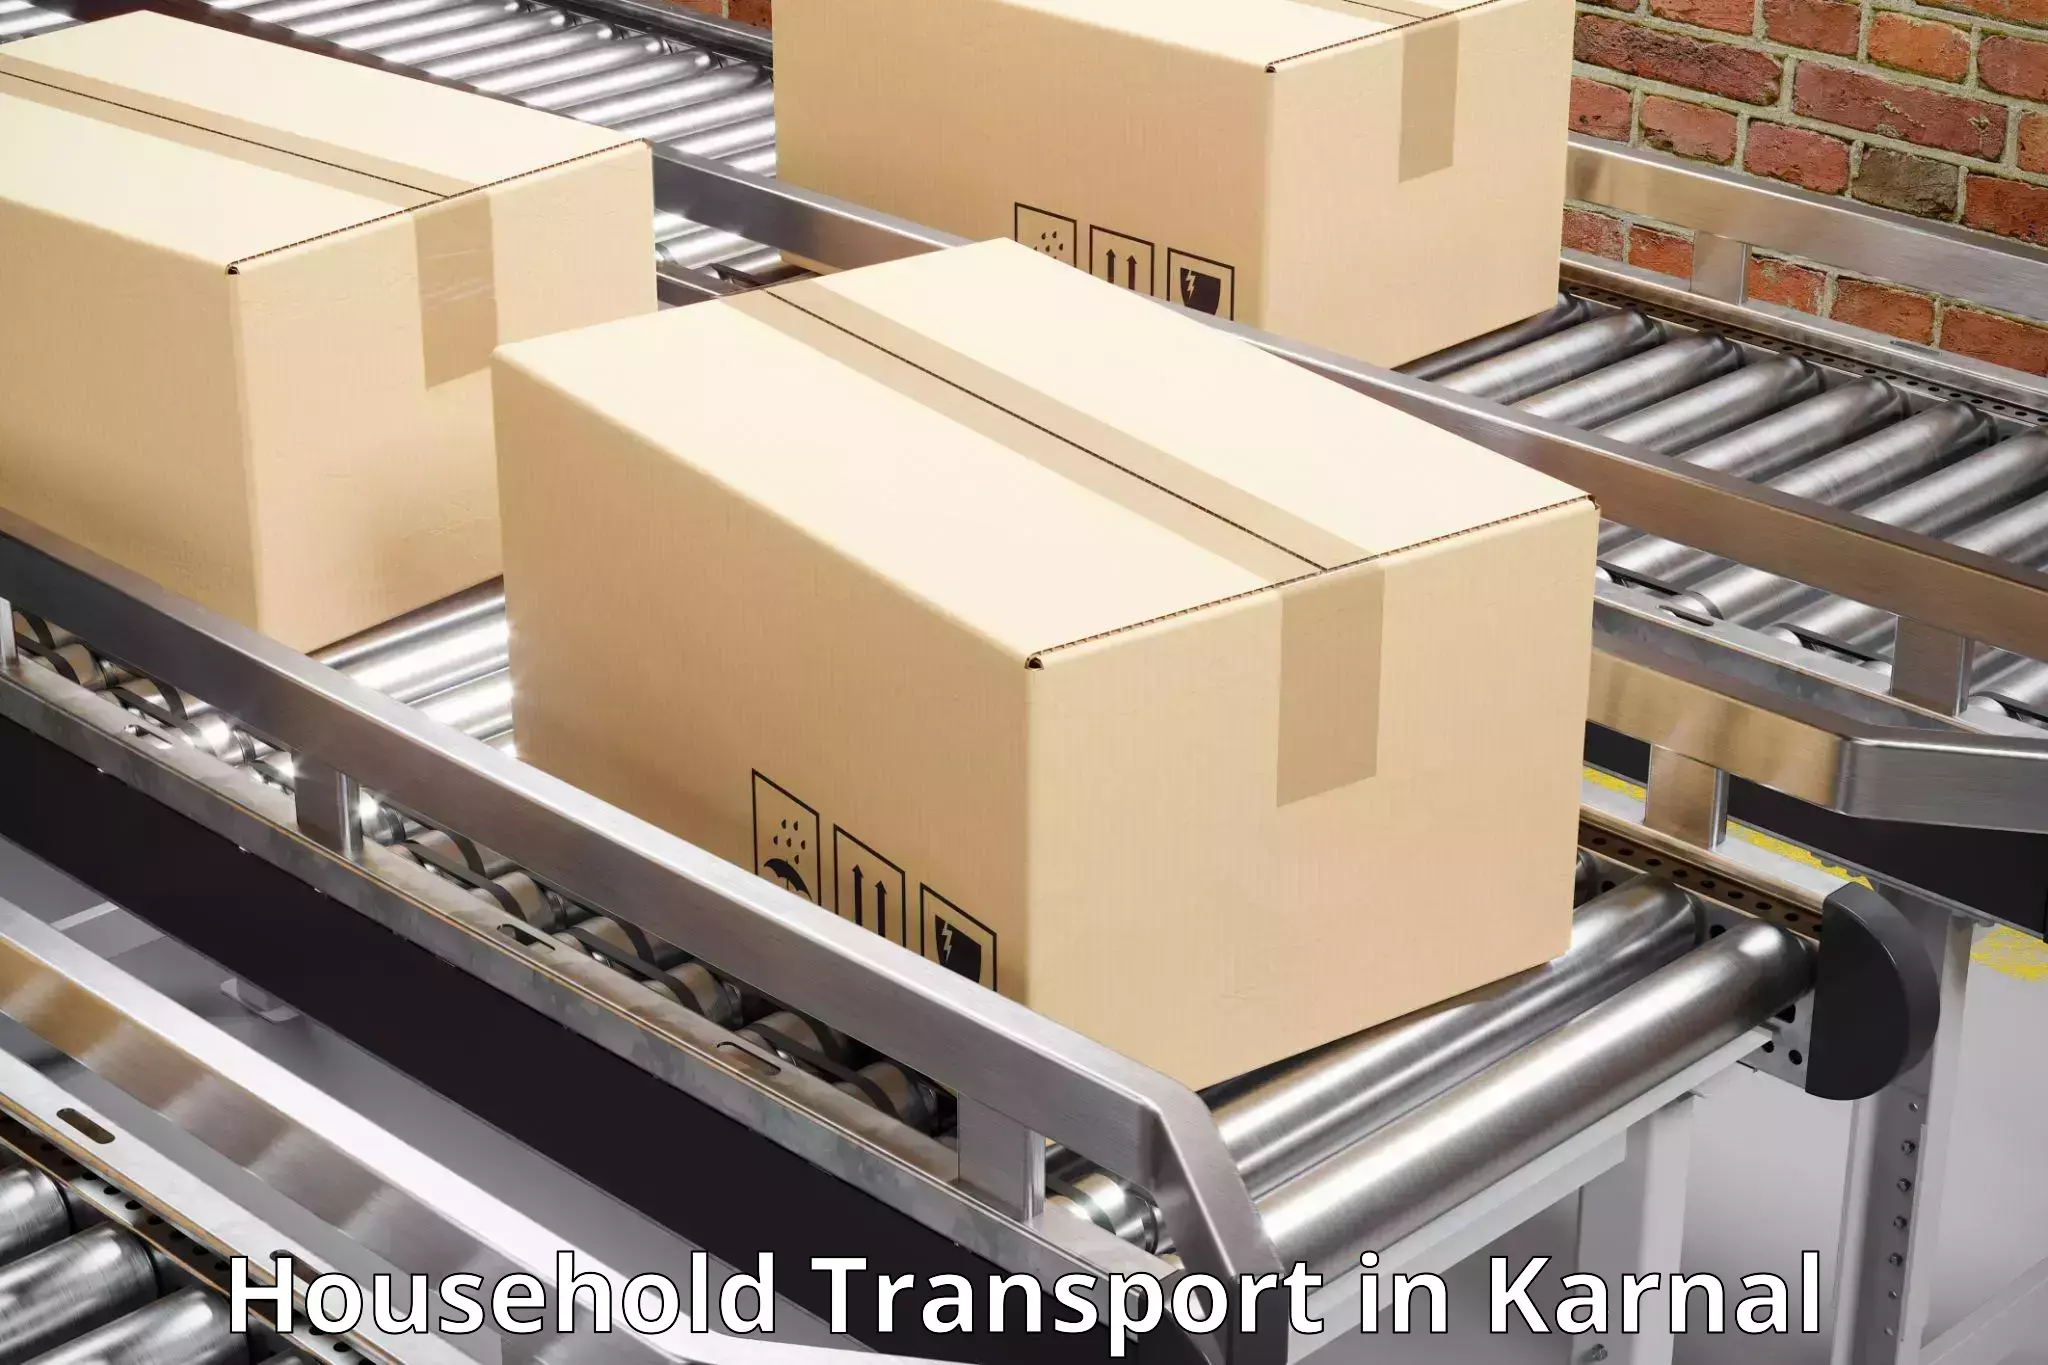 Reliable goods transport in Karnal